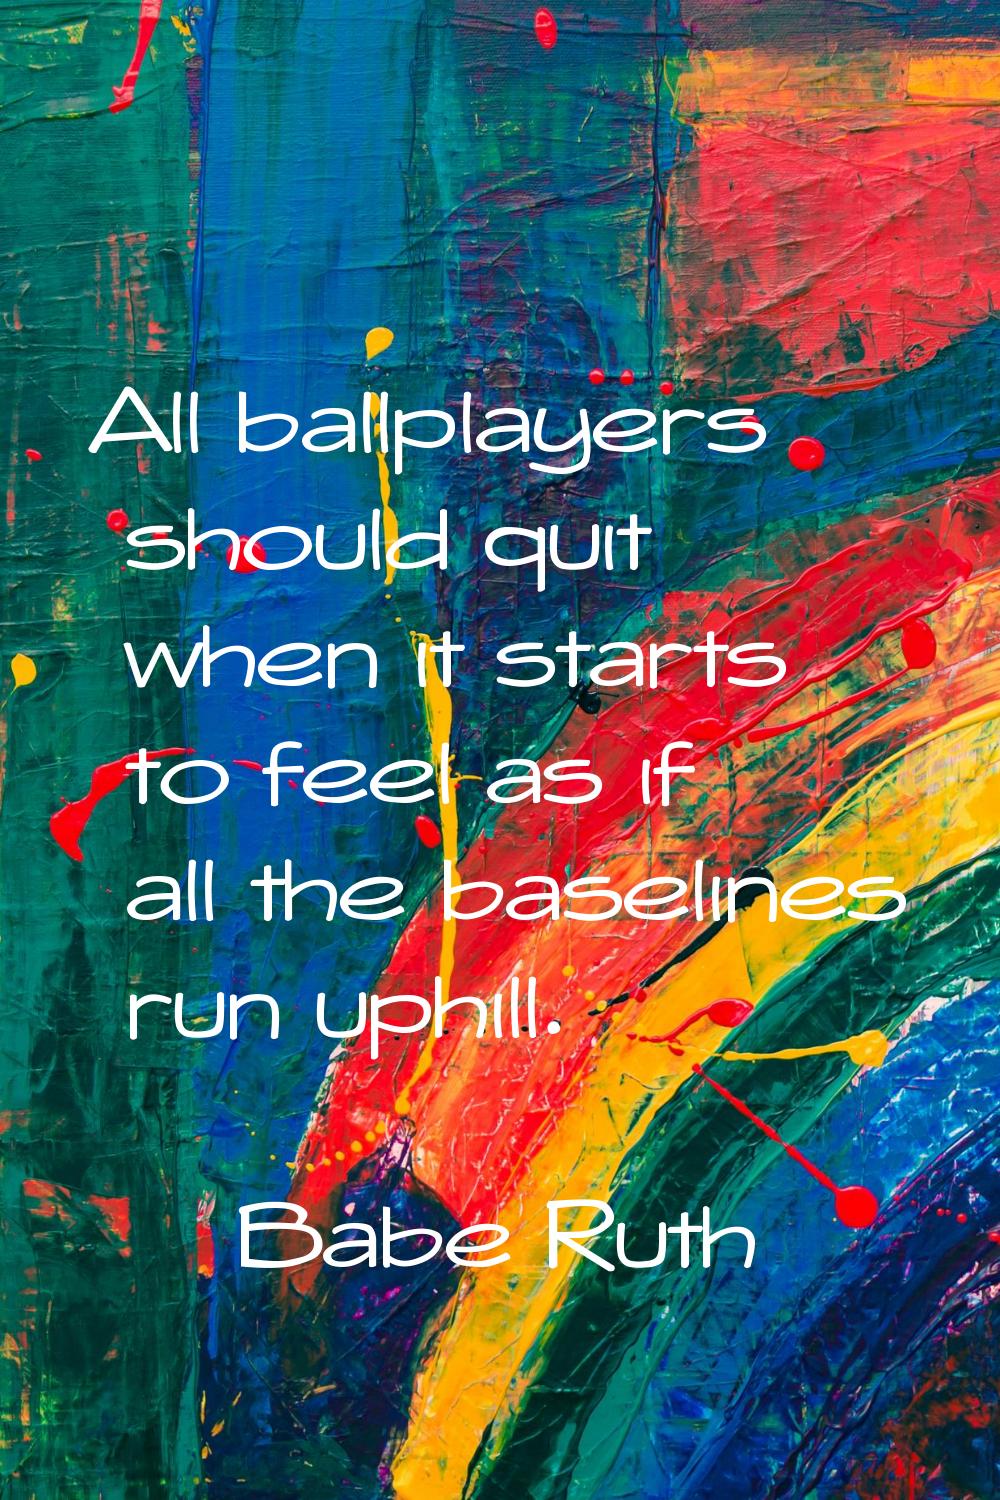 All ballplayers should quit when it starts to feel as if all the baselines run uphill.